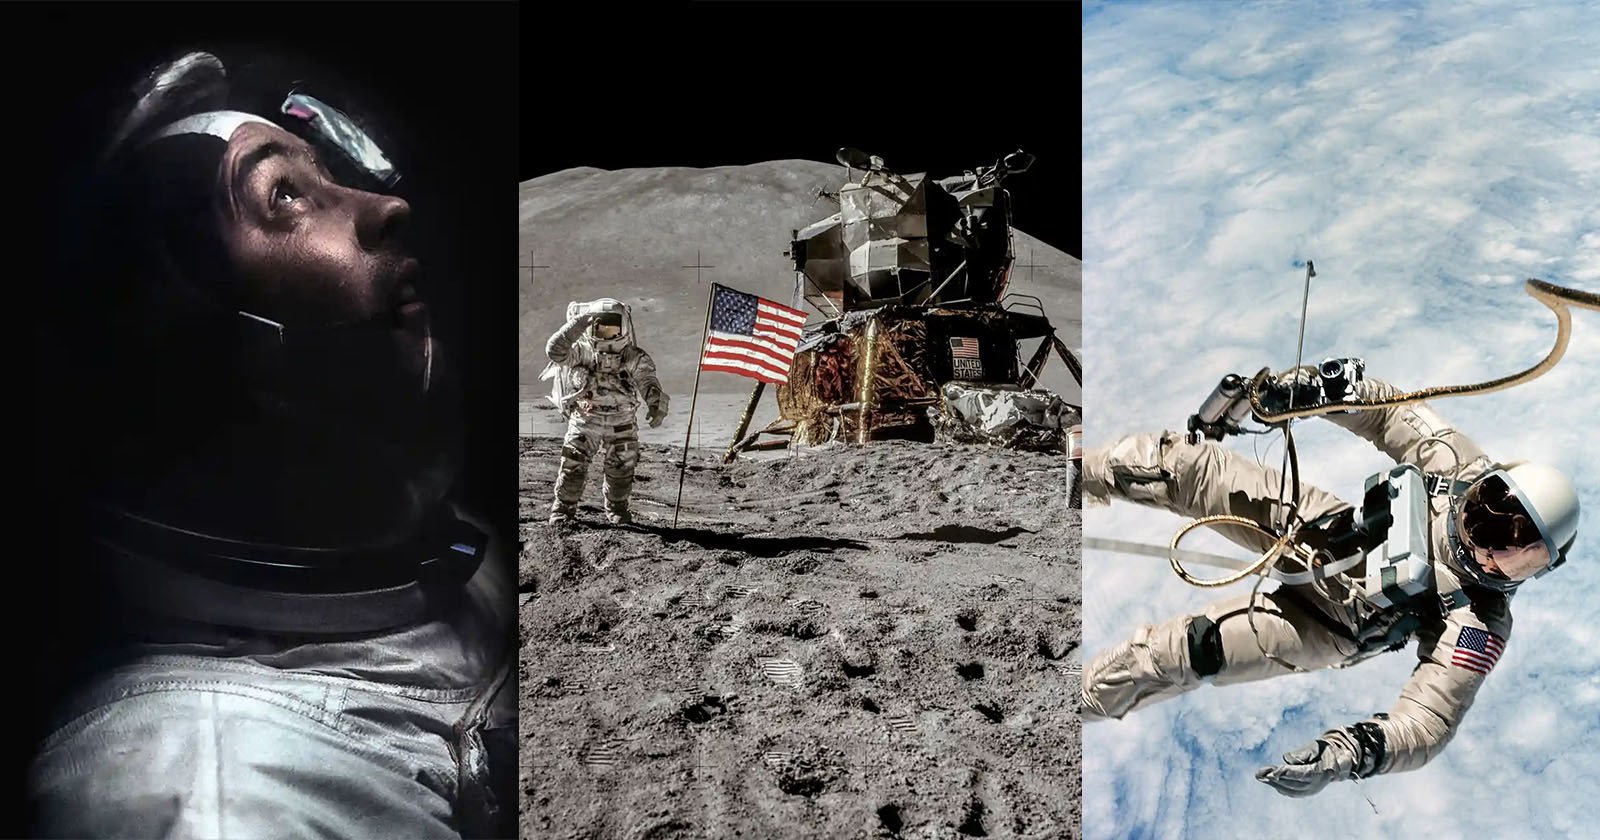 Apollo Moon Photos Painstakingly Remastered in Stunning High Definition